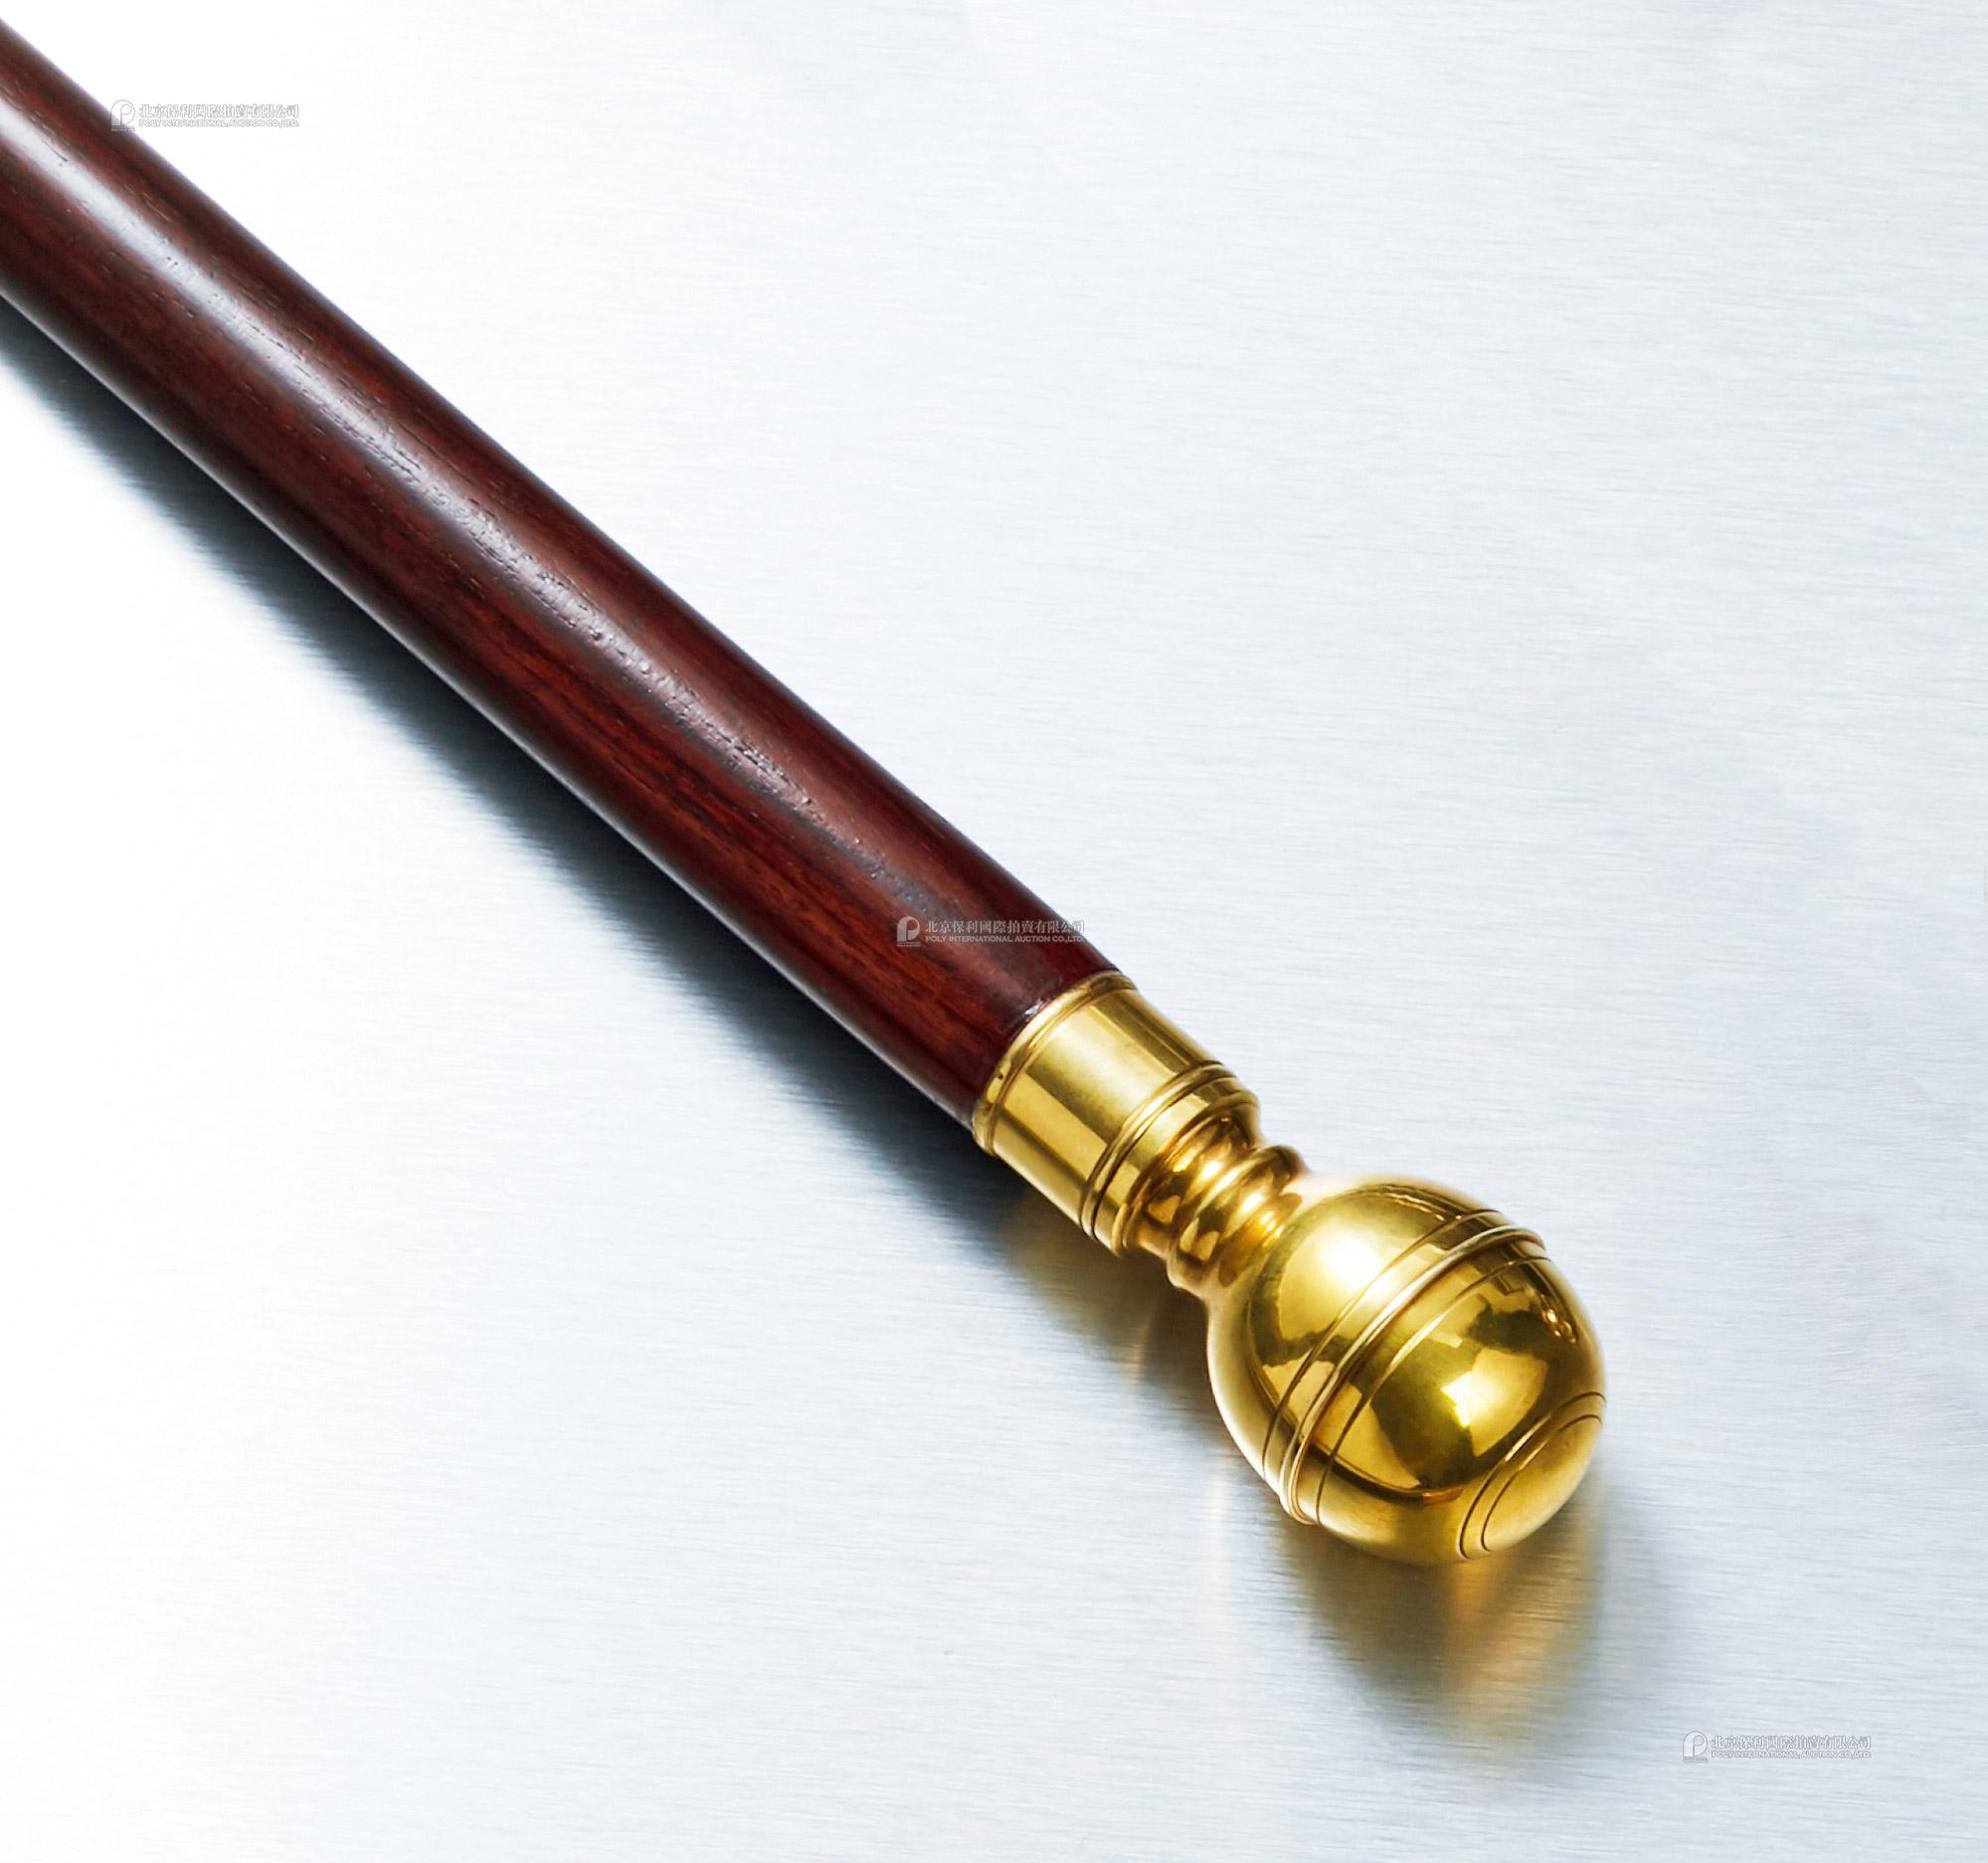 ENGLAND A WALKING CANE WITH BRONZE HANDLE AND COMPASS